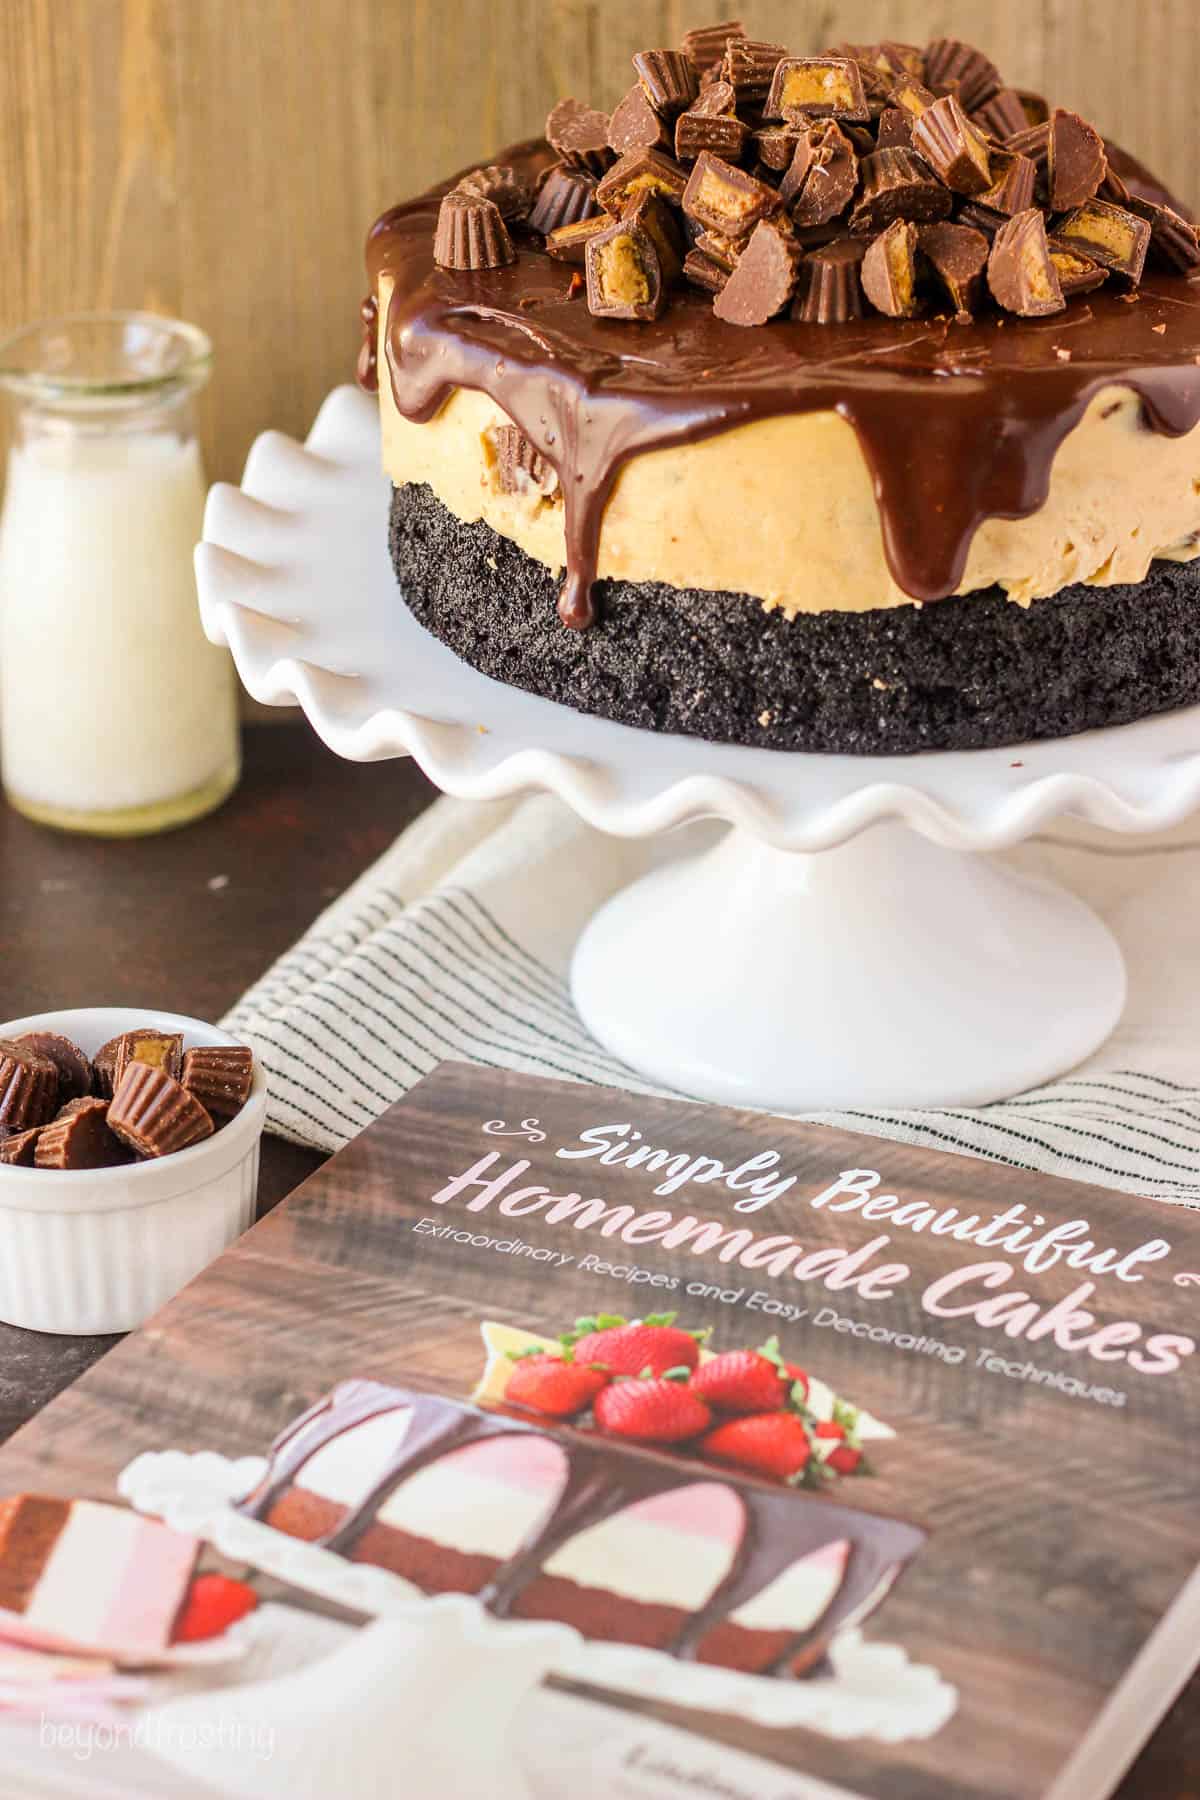 a cookbook lying next to a cake stand